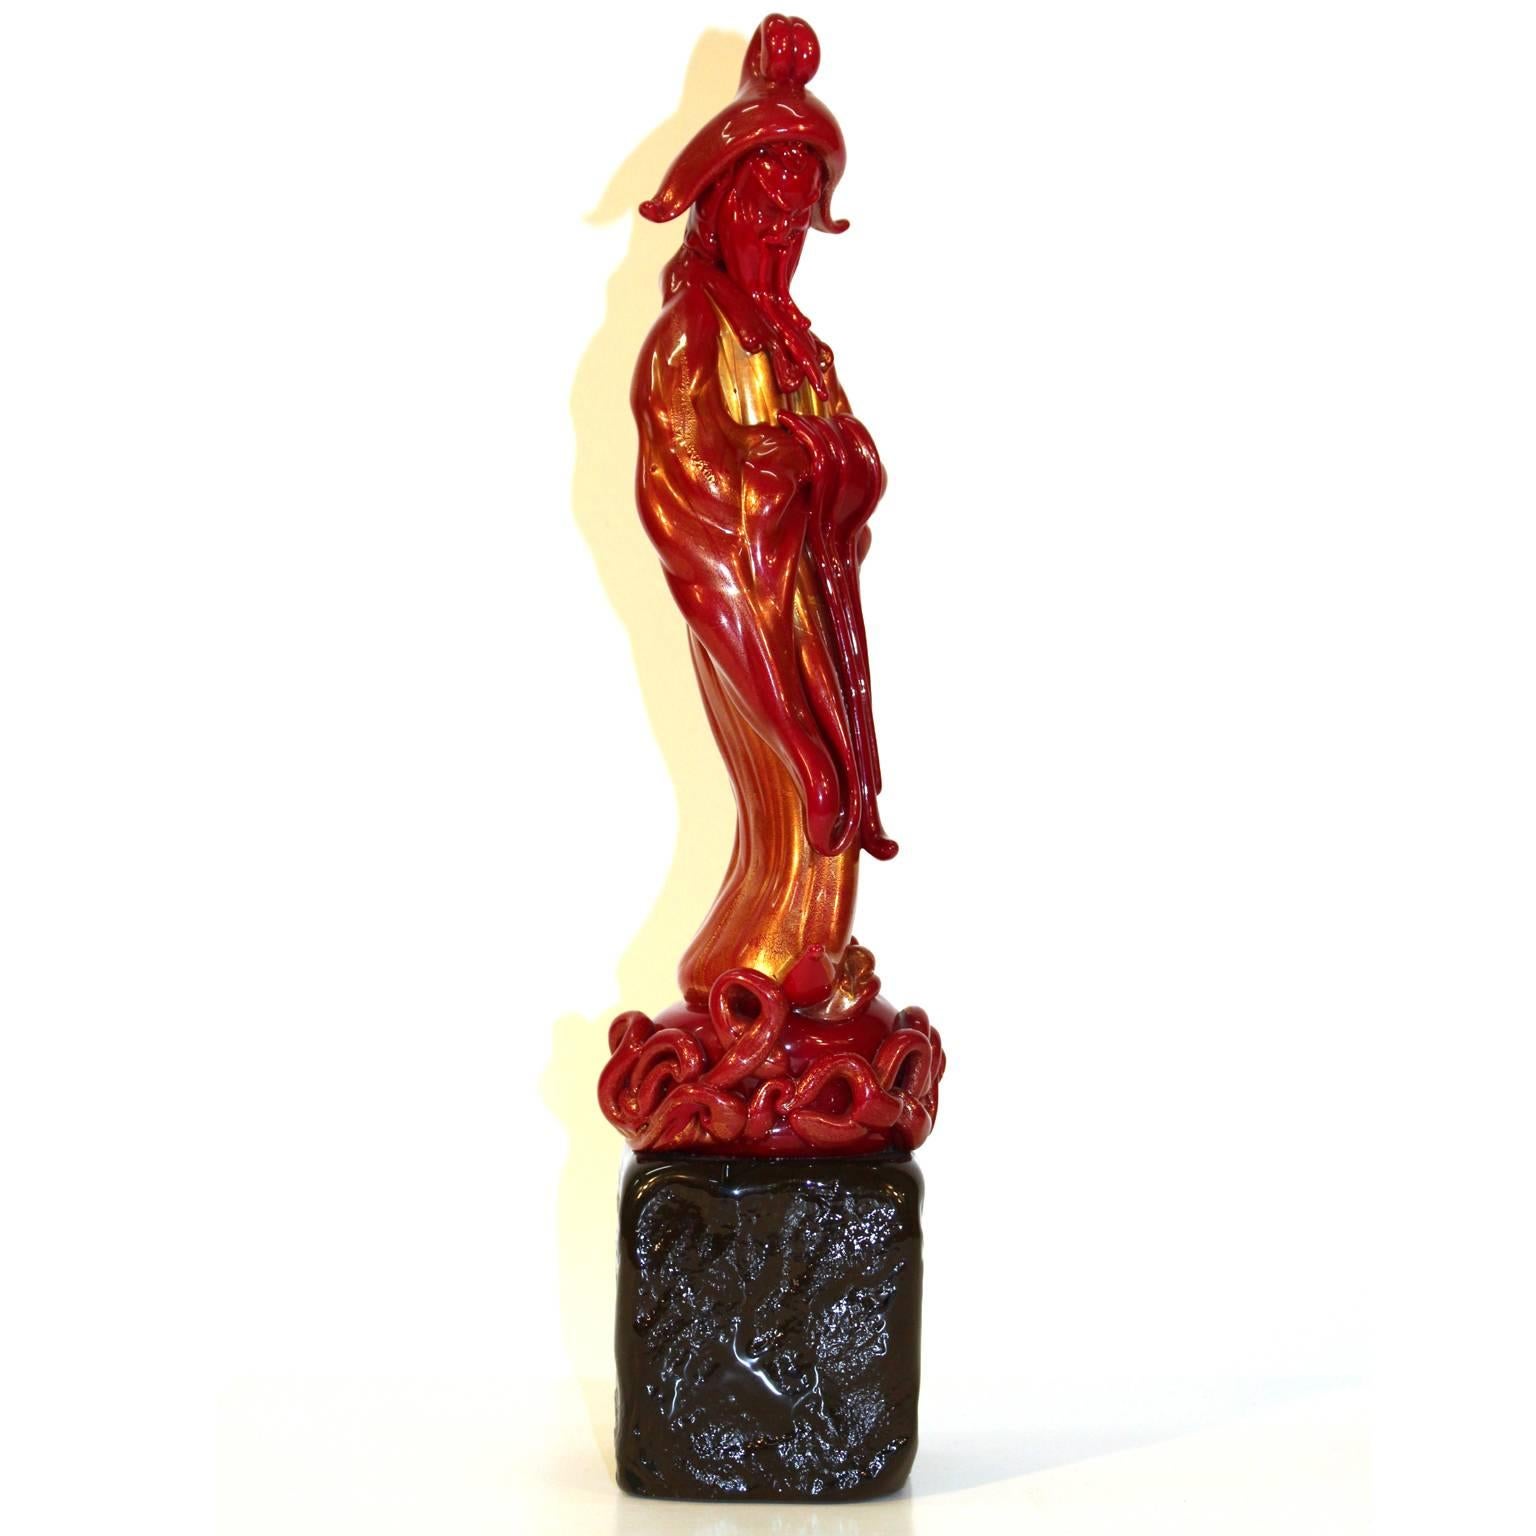 An Italian 1940s Murano art glass figure of a Chinese wise man. Blown red glass with 24-karat gold. The piece is in excellent condition.